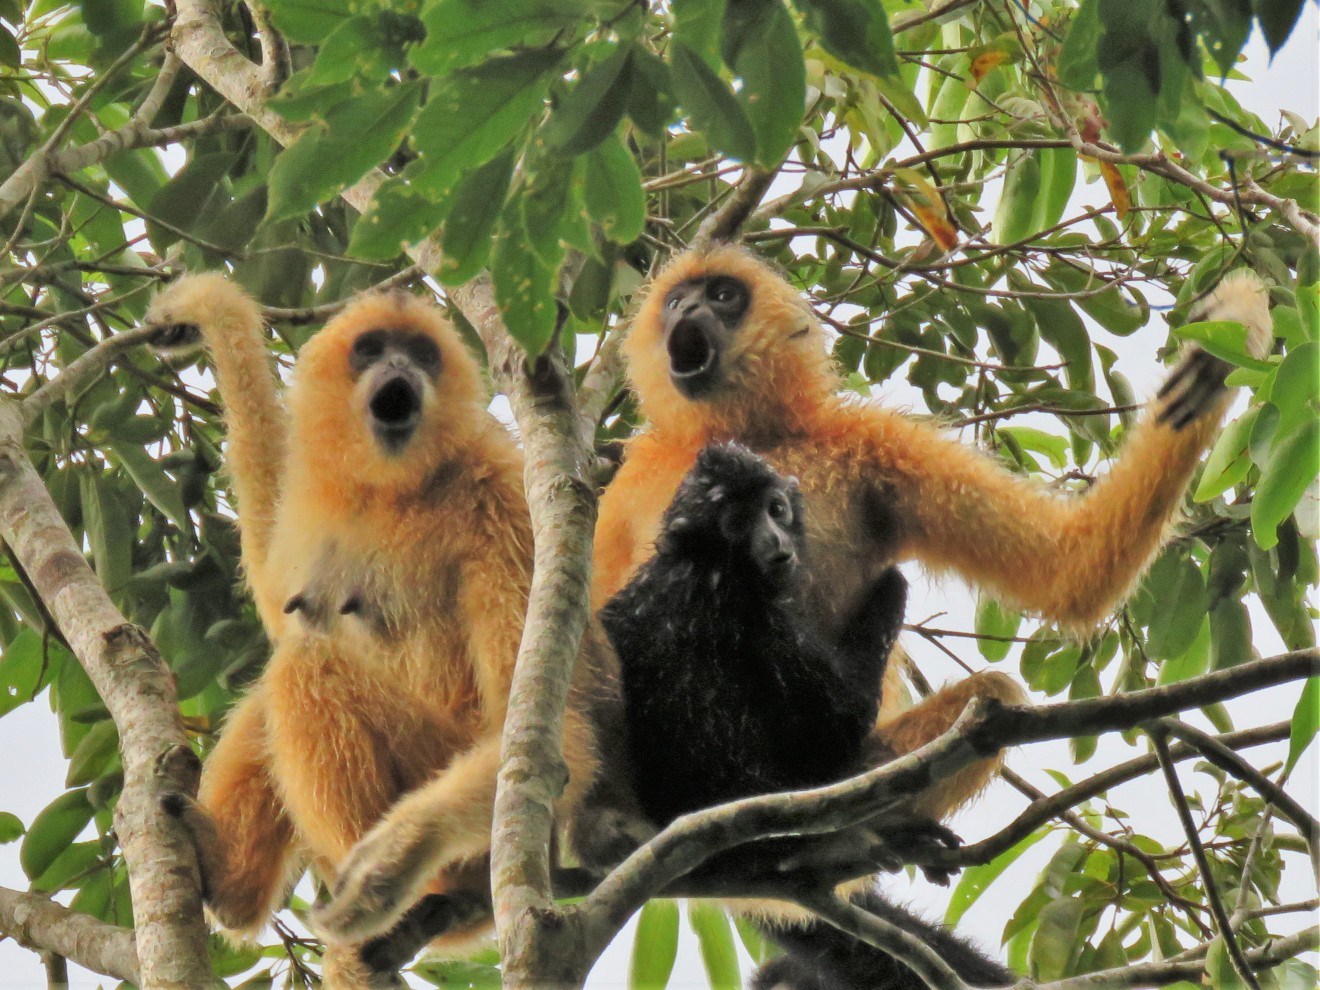 Every morning, the Hainan Gibbons welcome a new day with their elaborate, melodious song.